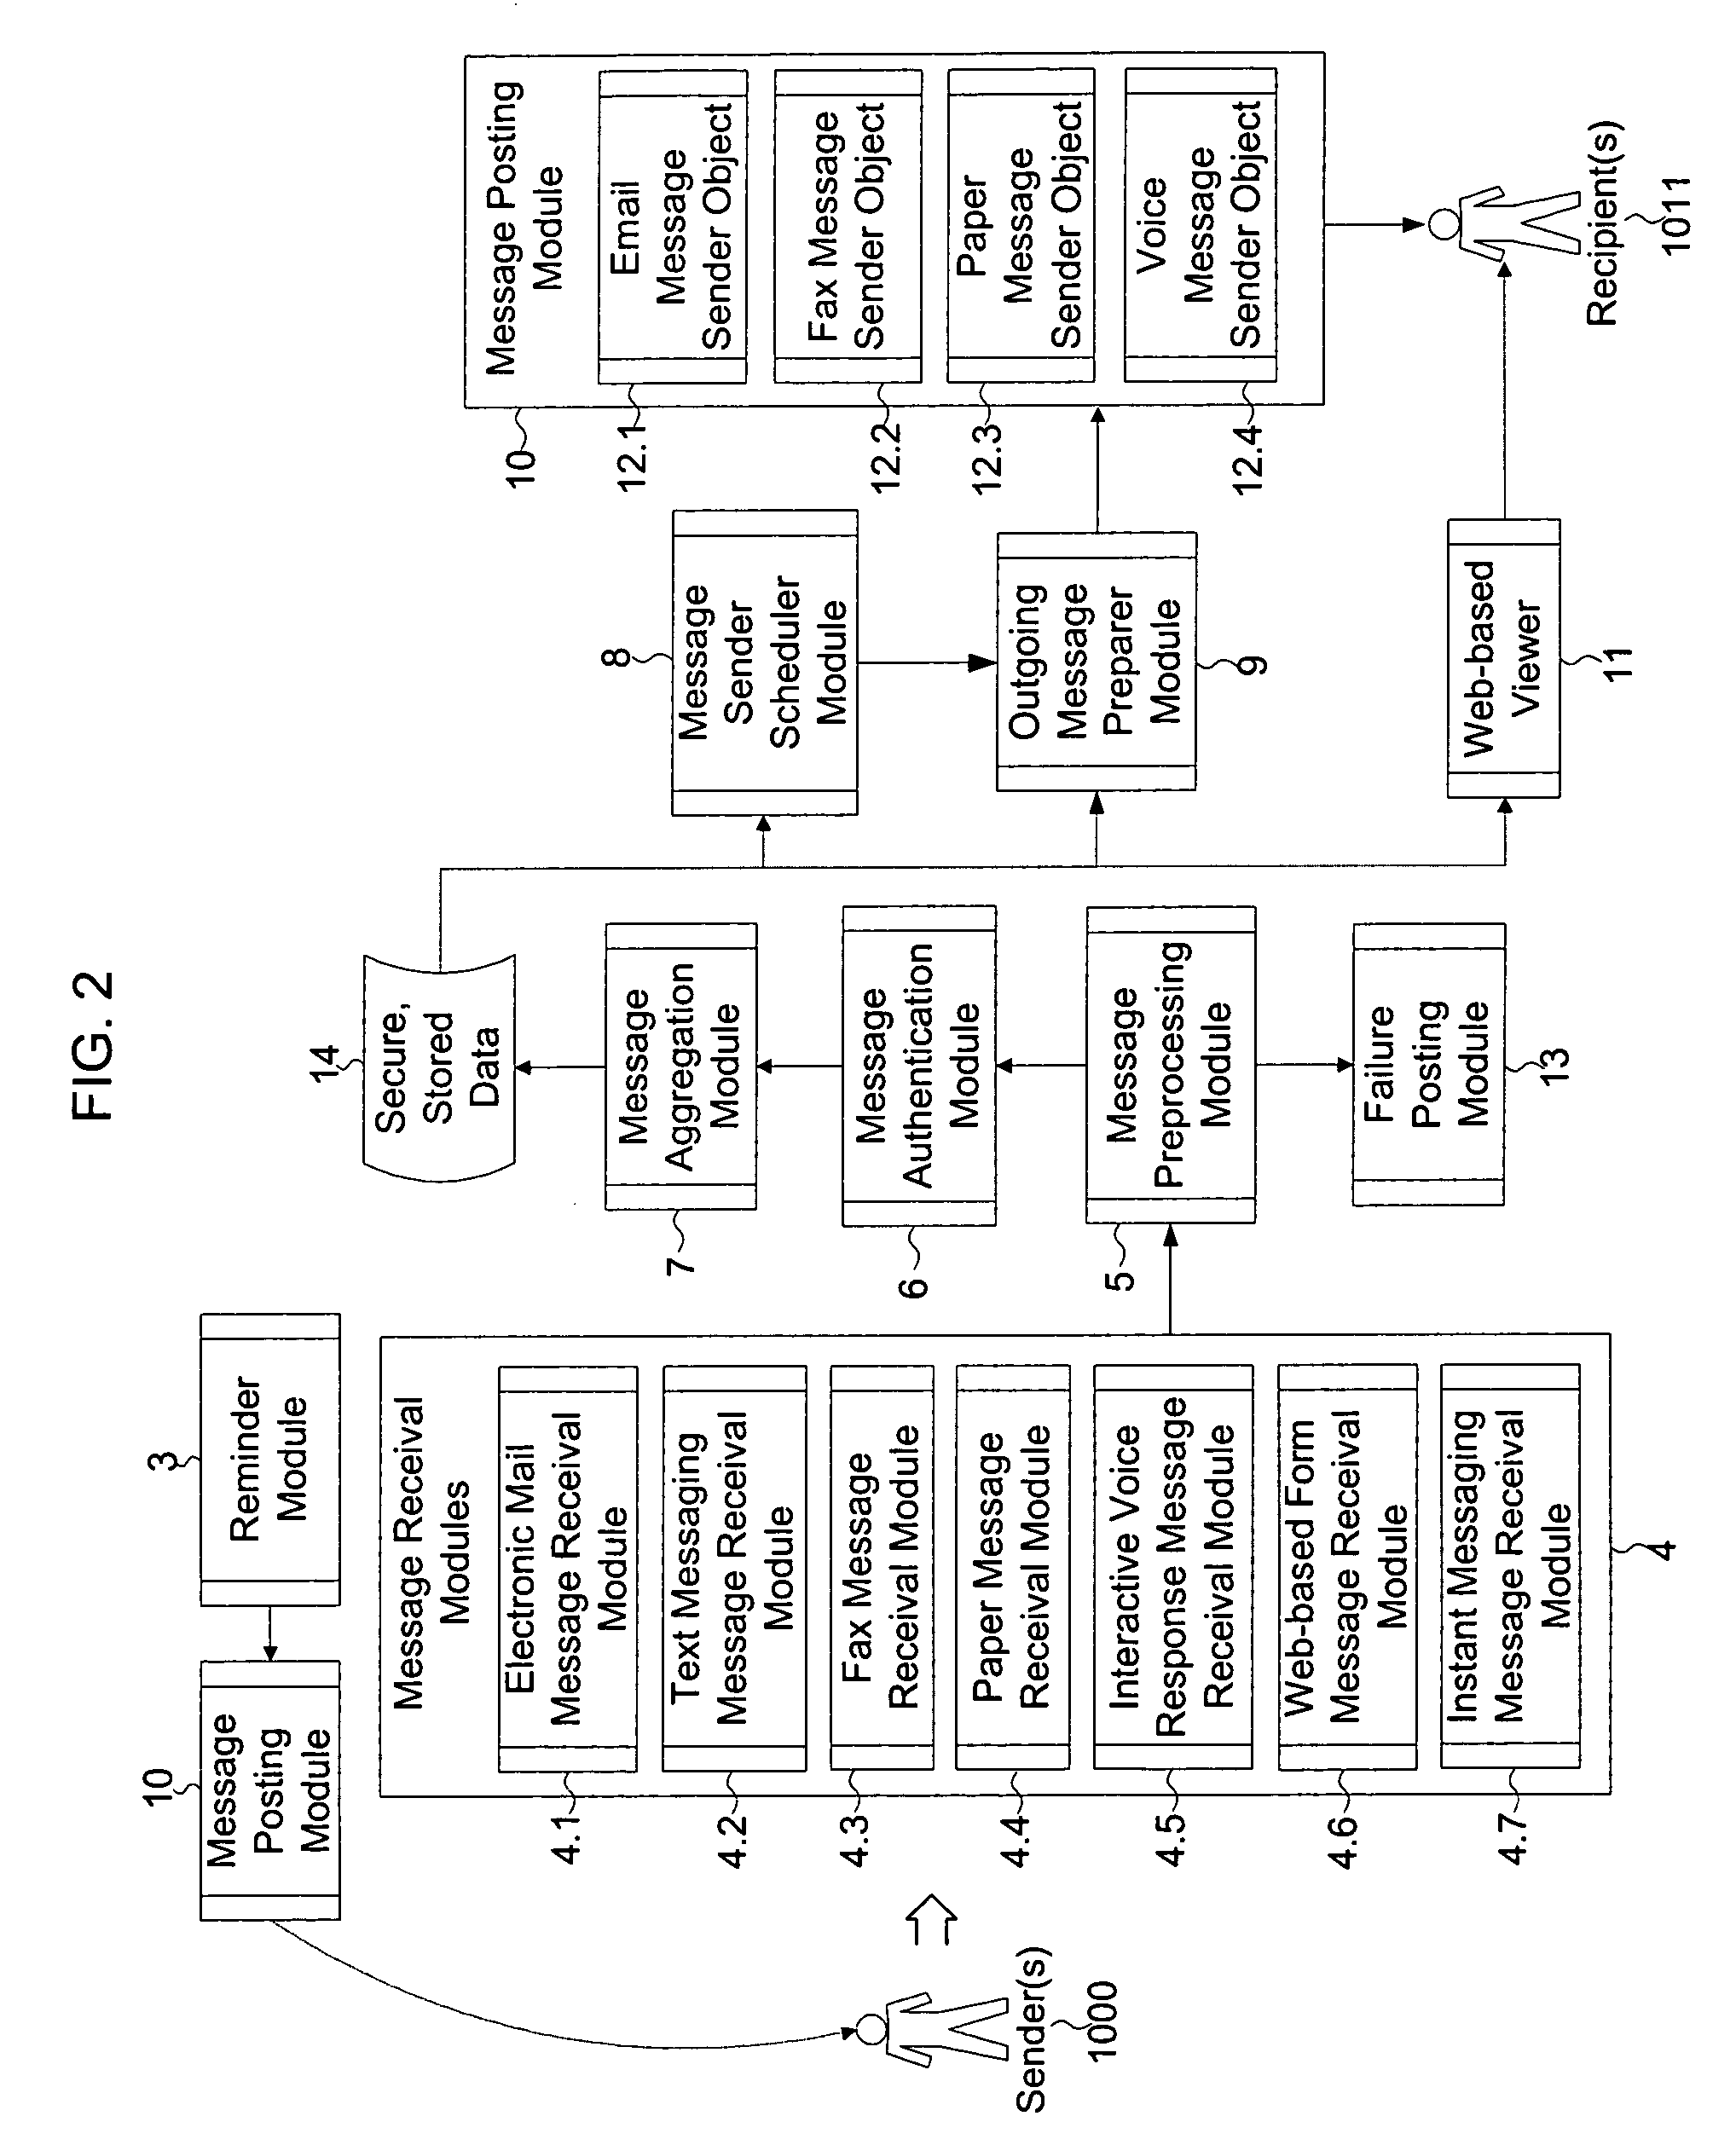 Method and system for communication from anonymous sender(s) to known recipient(s) for feedback applications